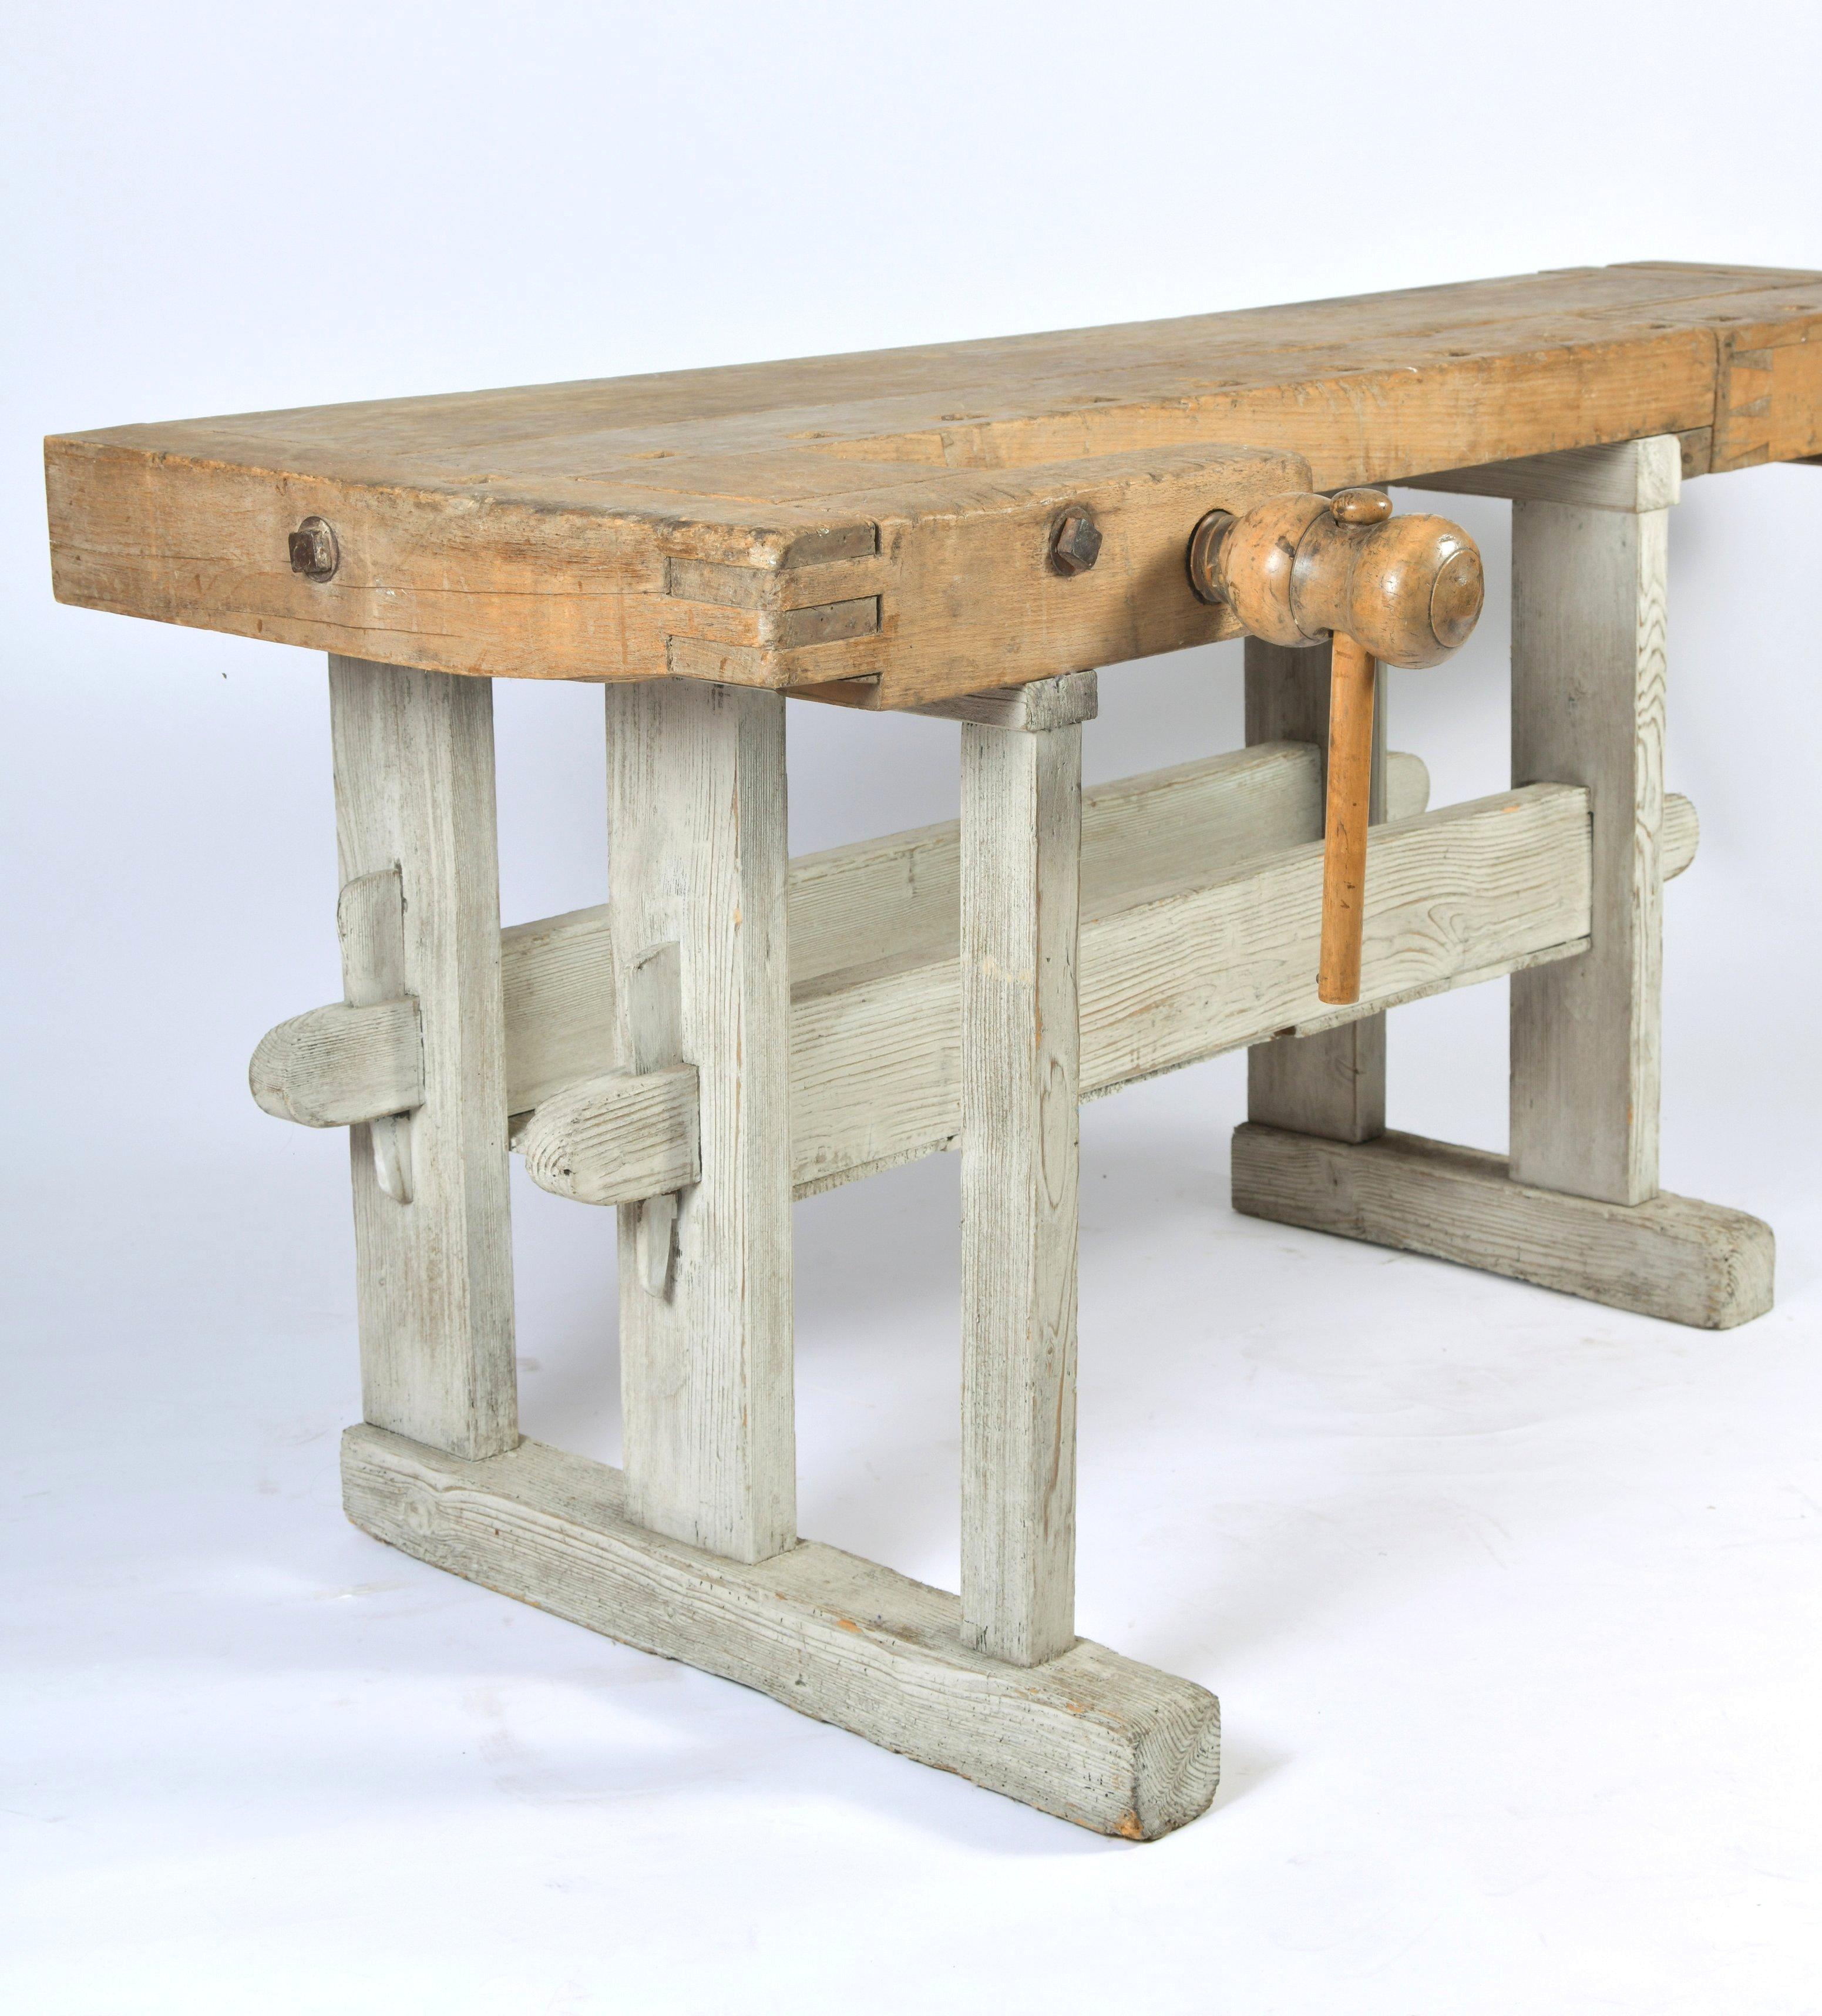 This fabulous Primitive wood workbench features a beechwood top with a painted white washed pine base. The maximum measurements including the screws are 81 in – 205.7 cm wide, 32 in – 81.2 cm deep and 31 3/4 in - 80.6 cm in height. The actual work